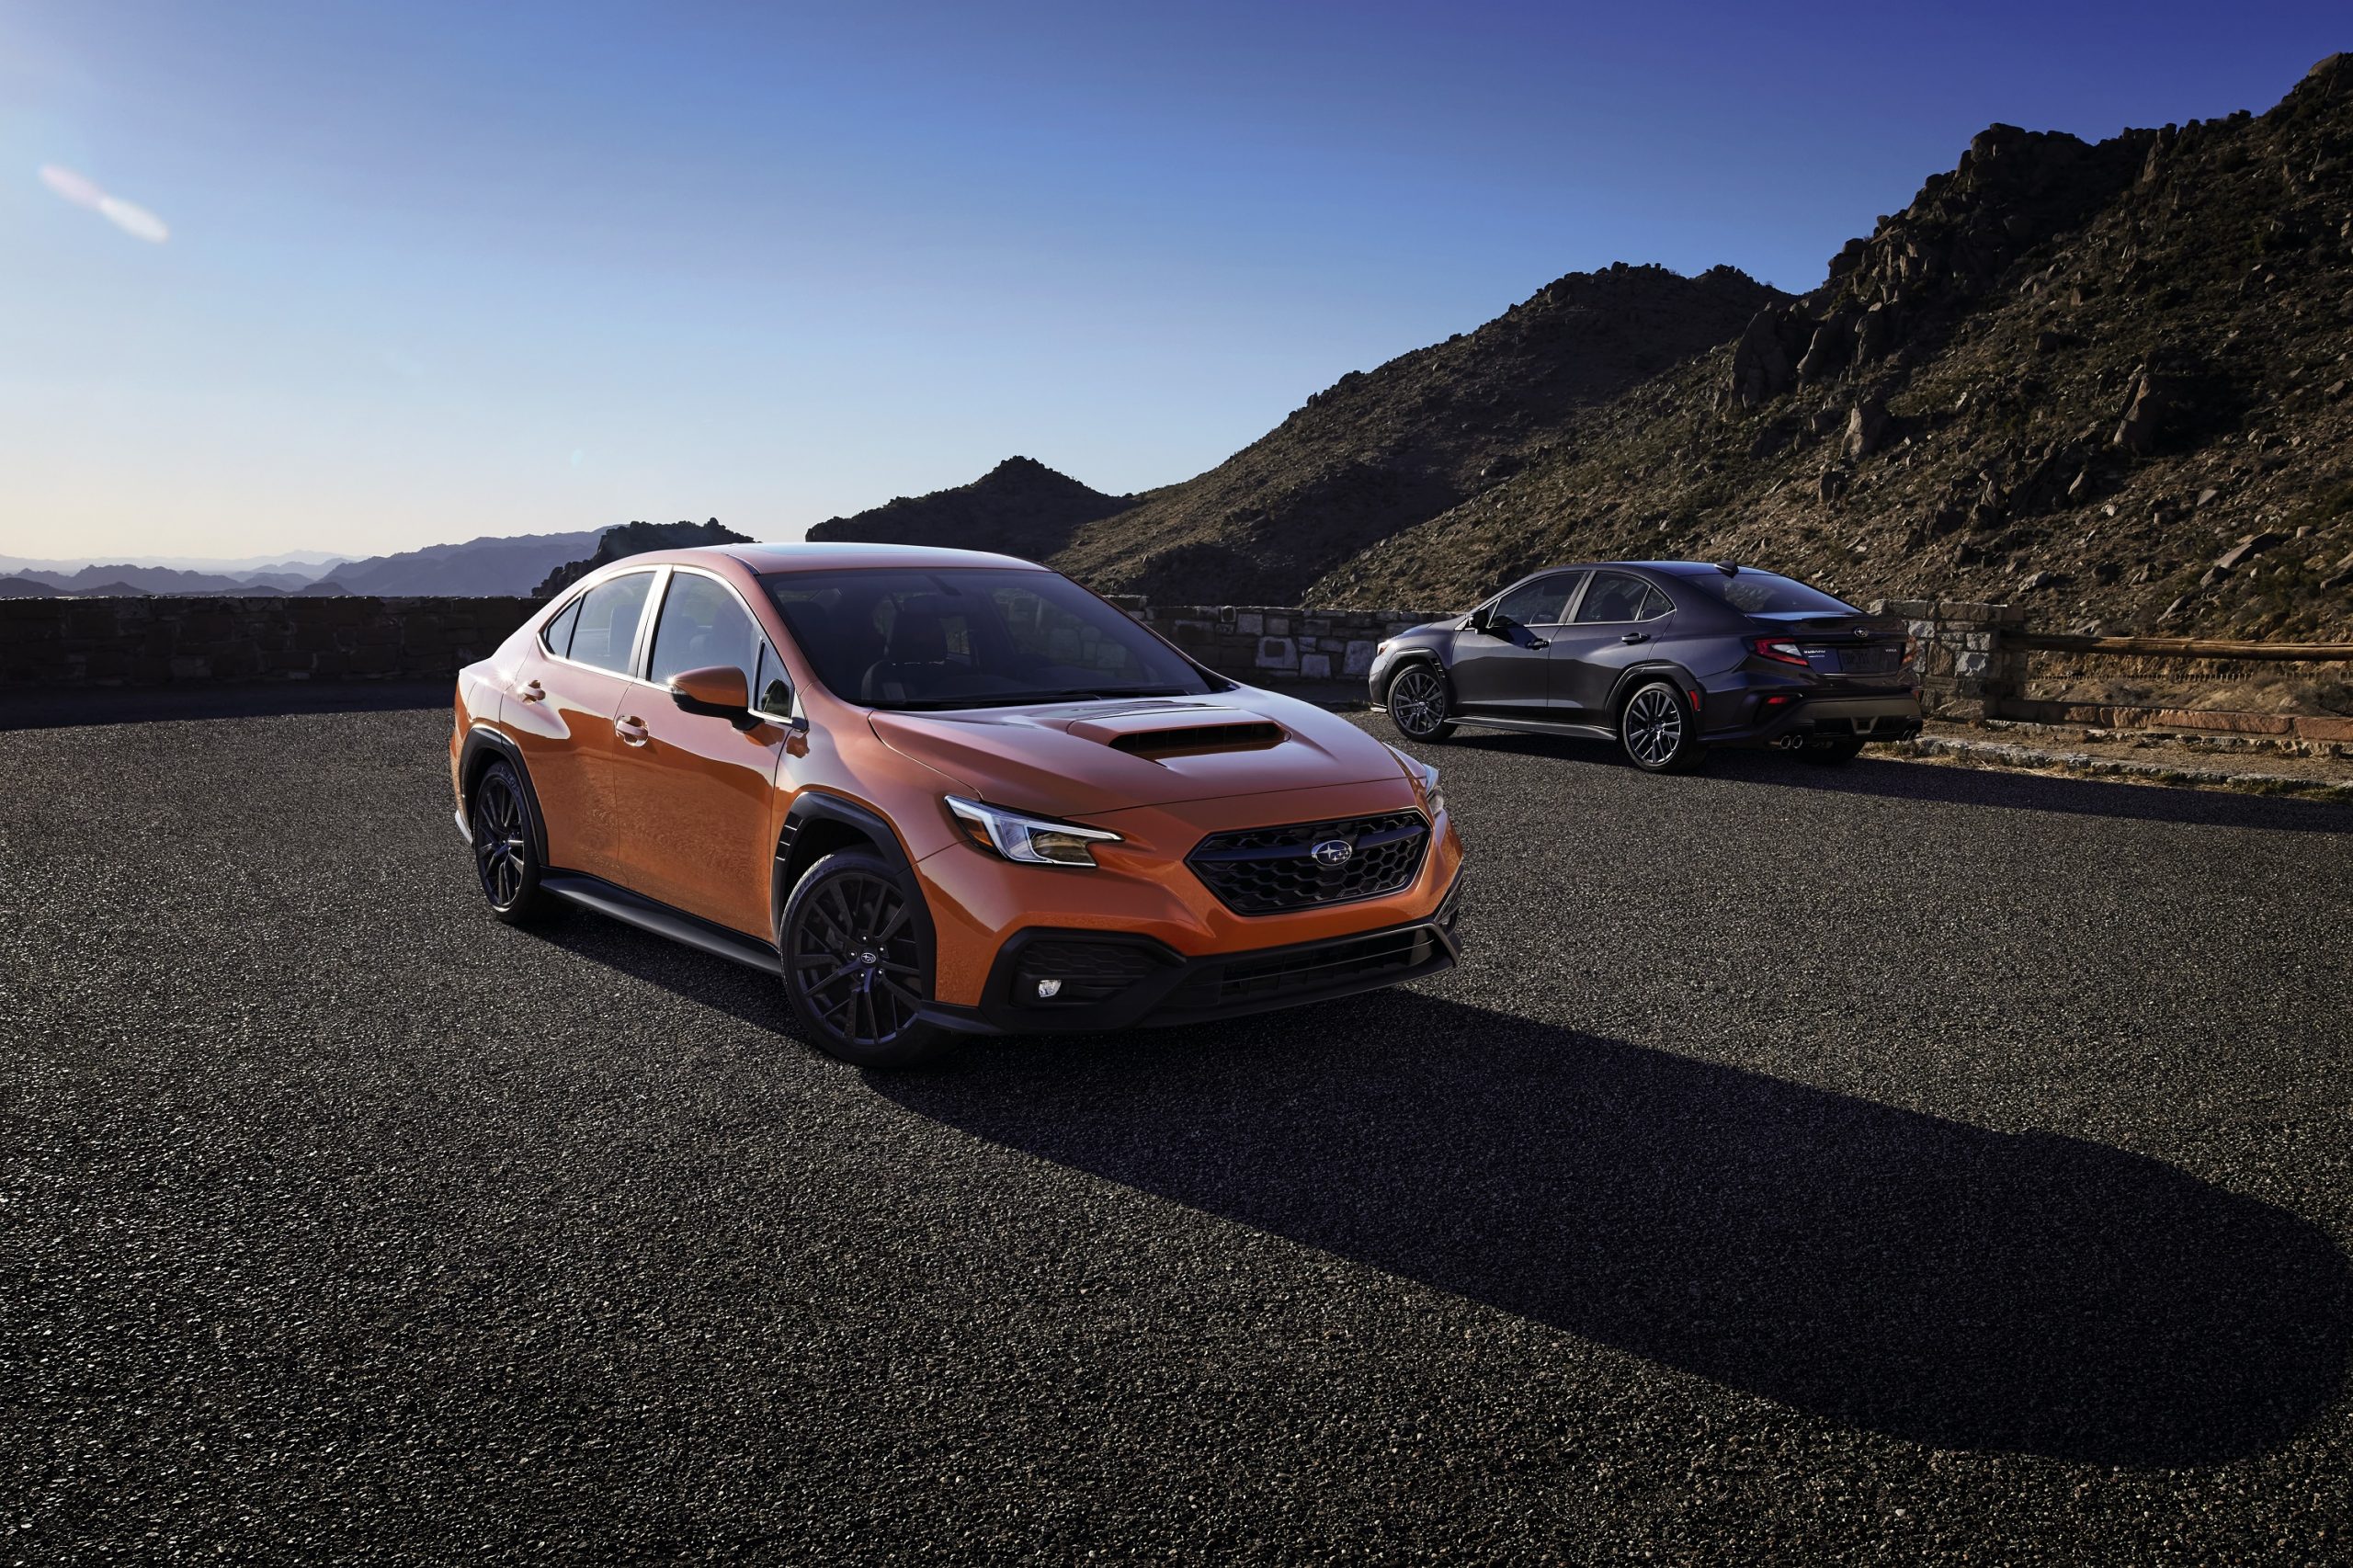 An orange 2022 Subaru WRX shot in the foreground from the 3/4 angle with a blue model behind